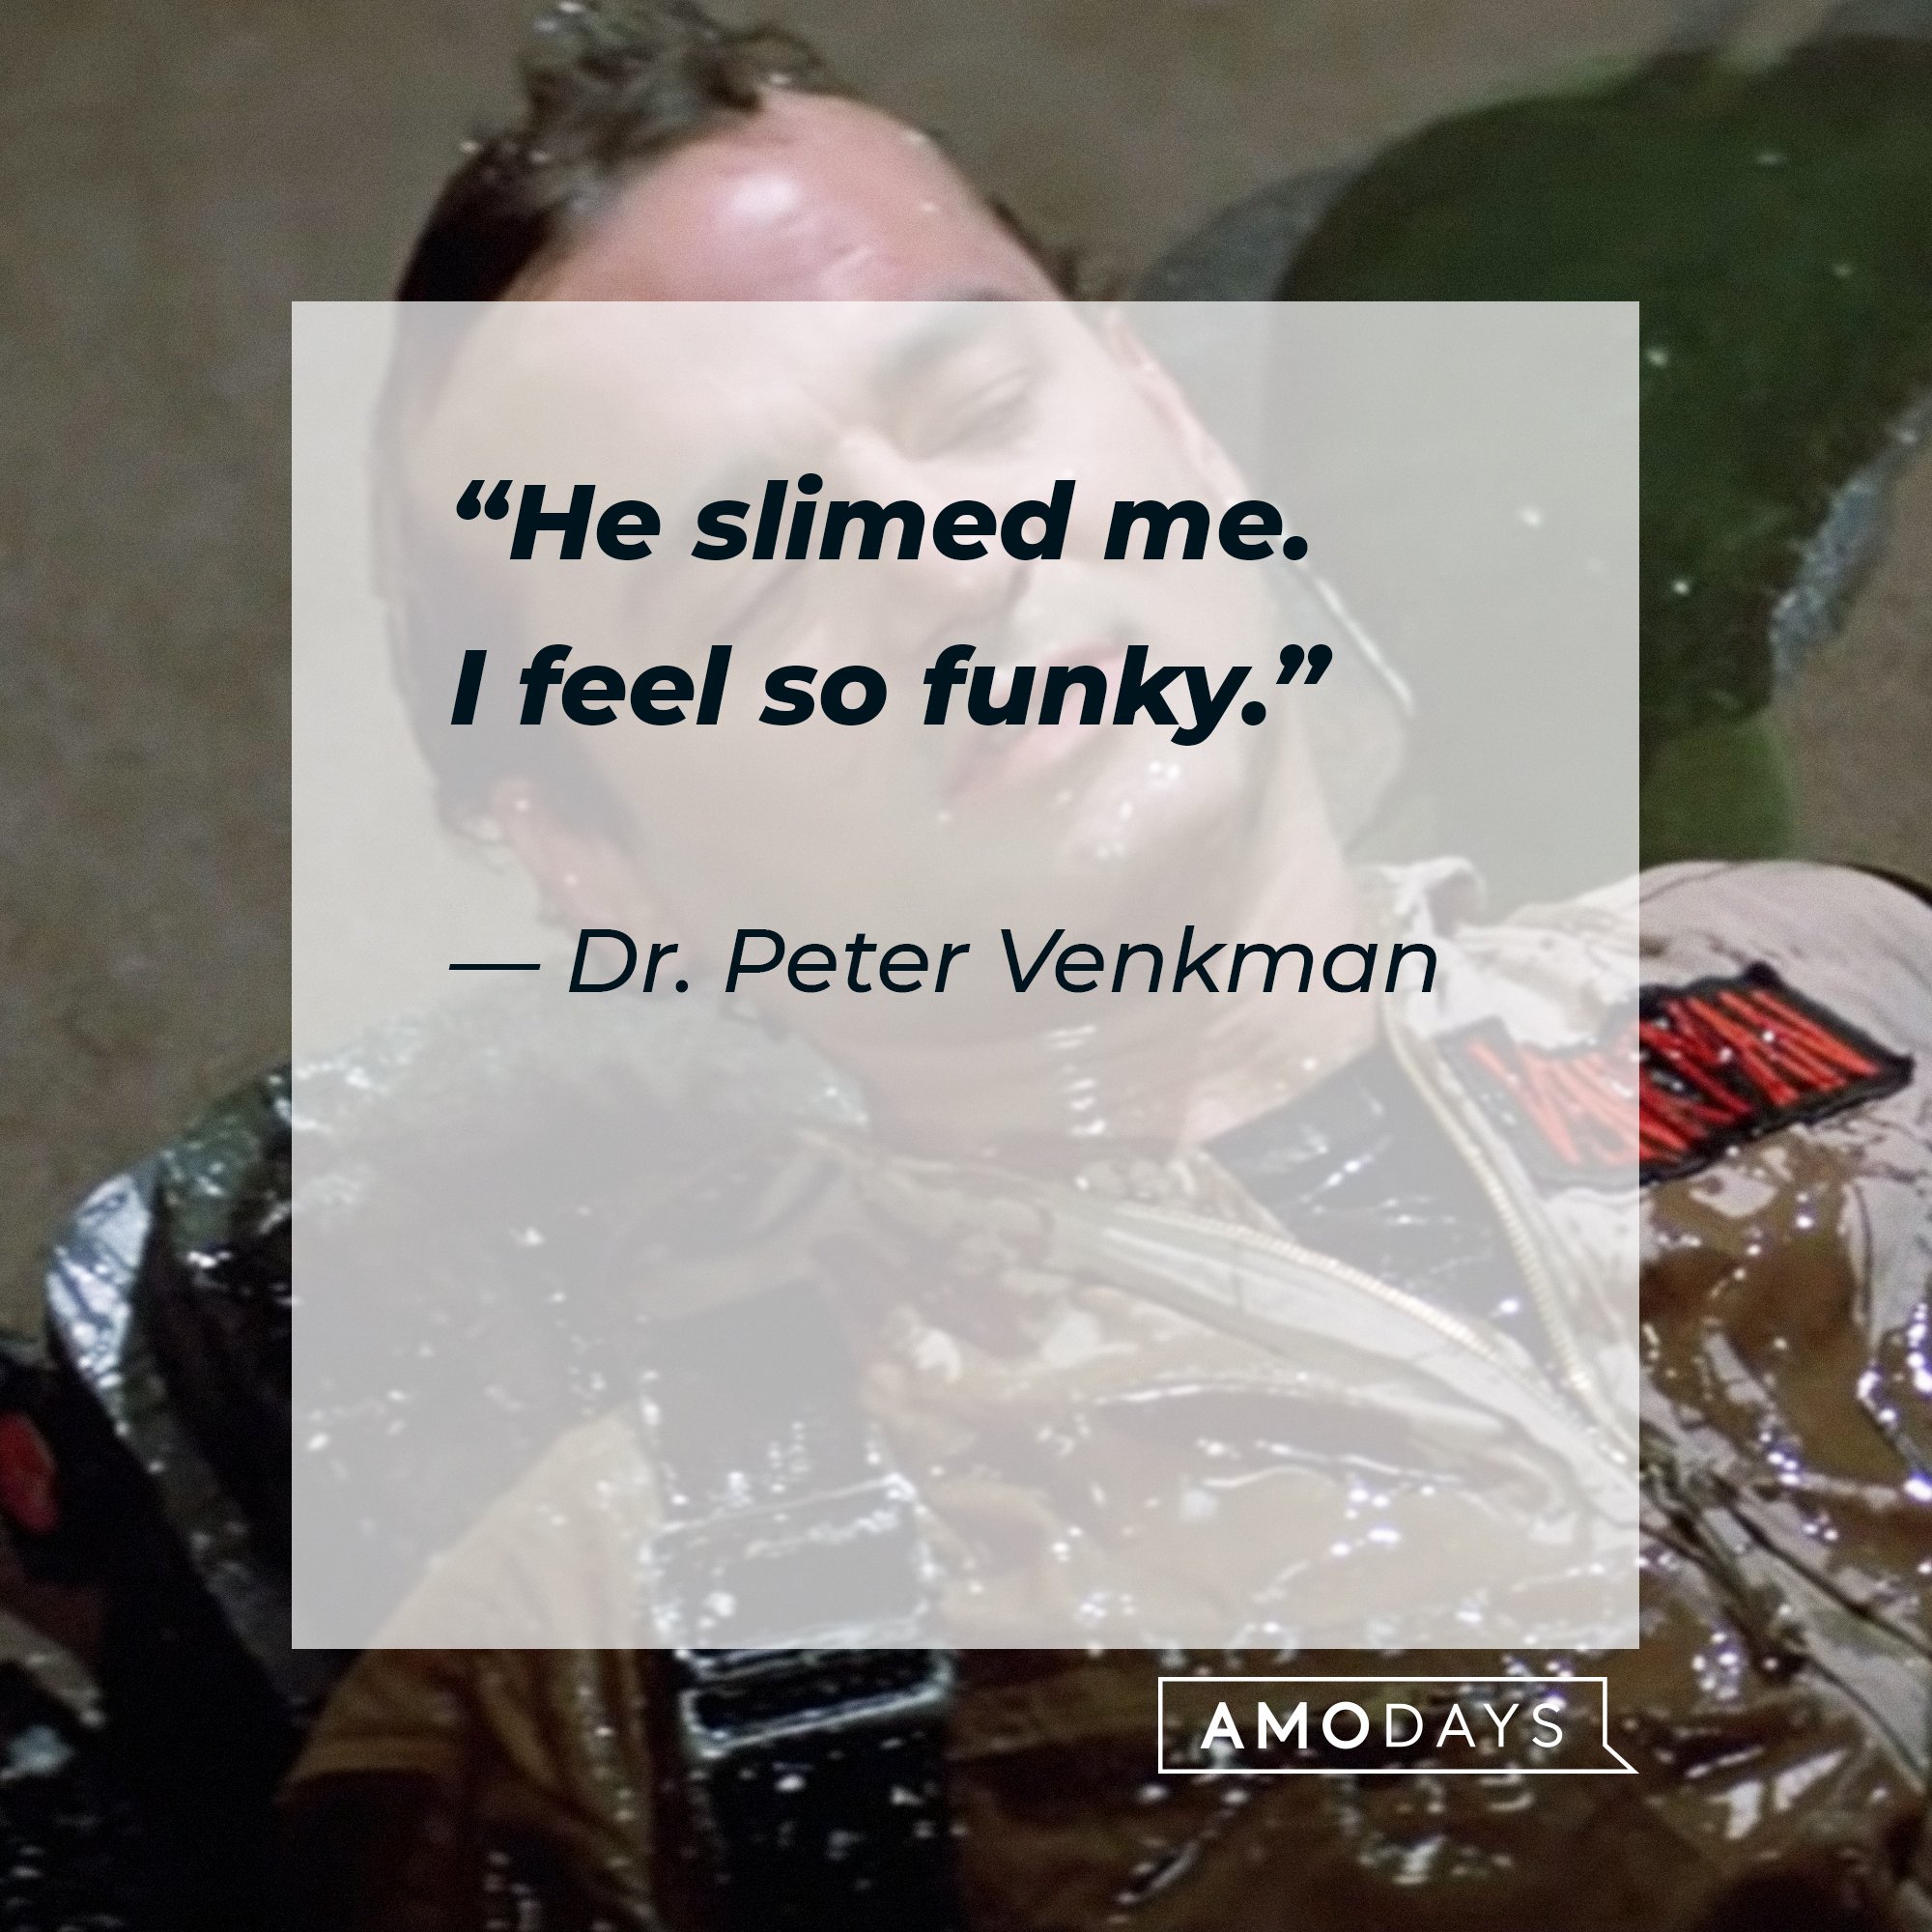  Dr. Peter Venkman's quote: “He slimed me. I feel so funky.” | Image: AmoDays